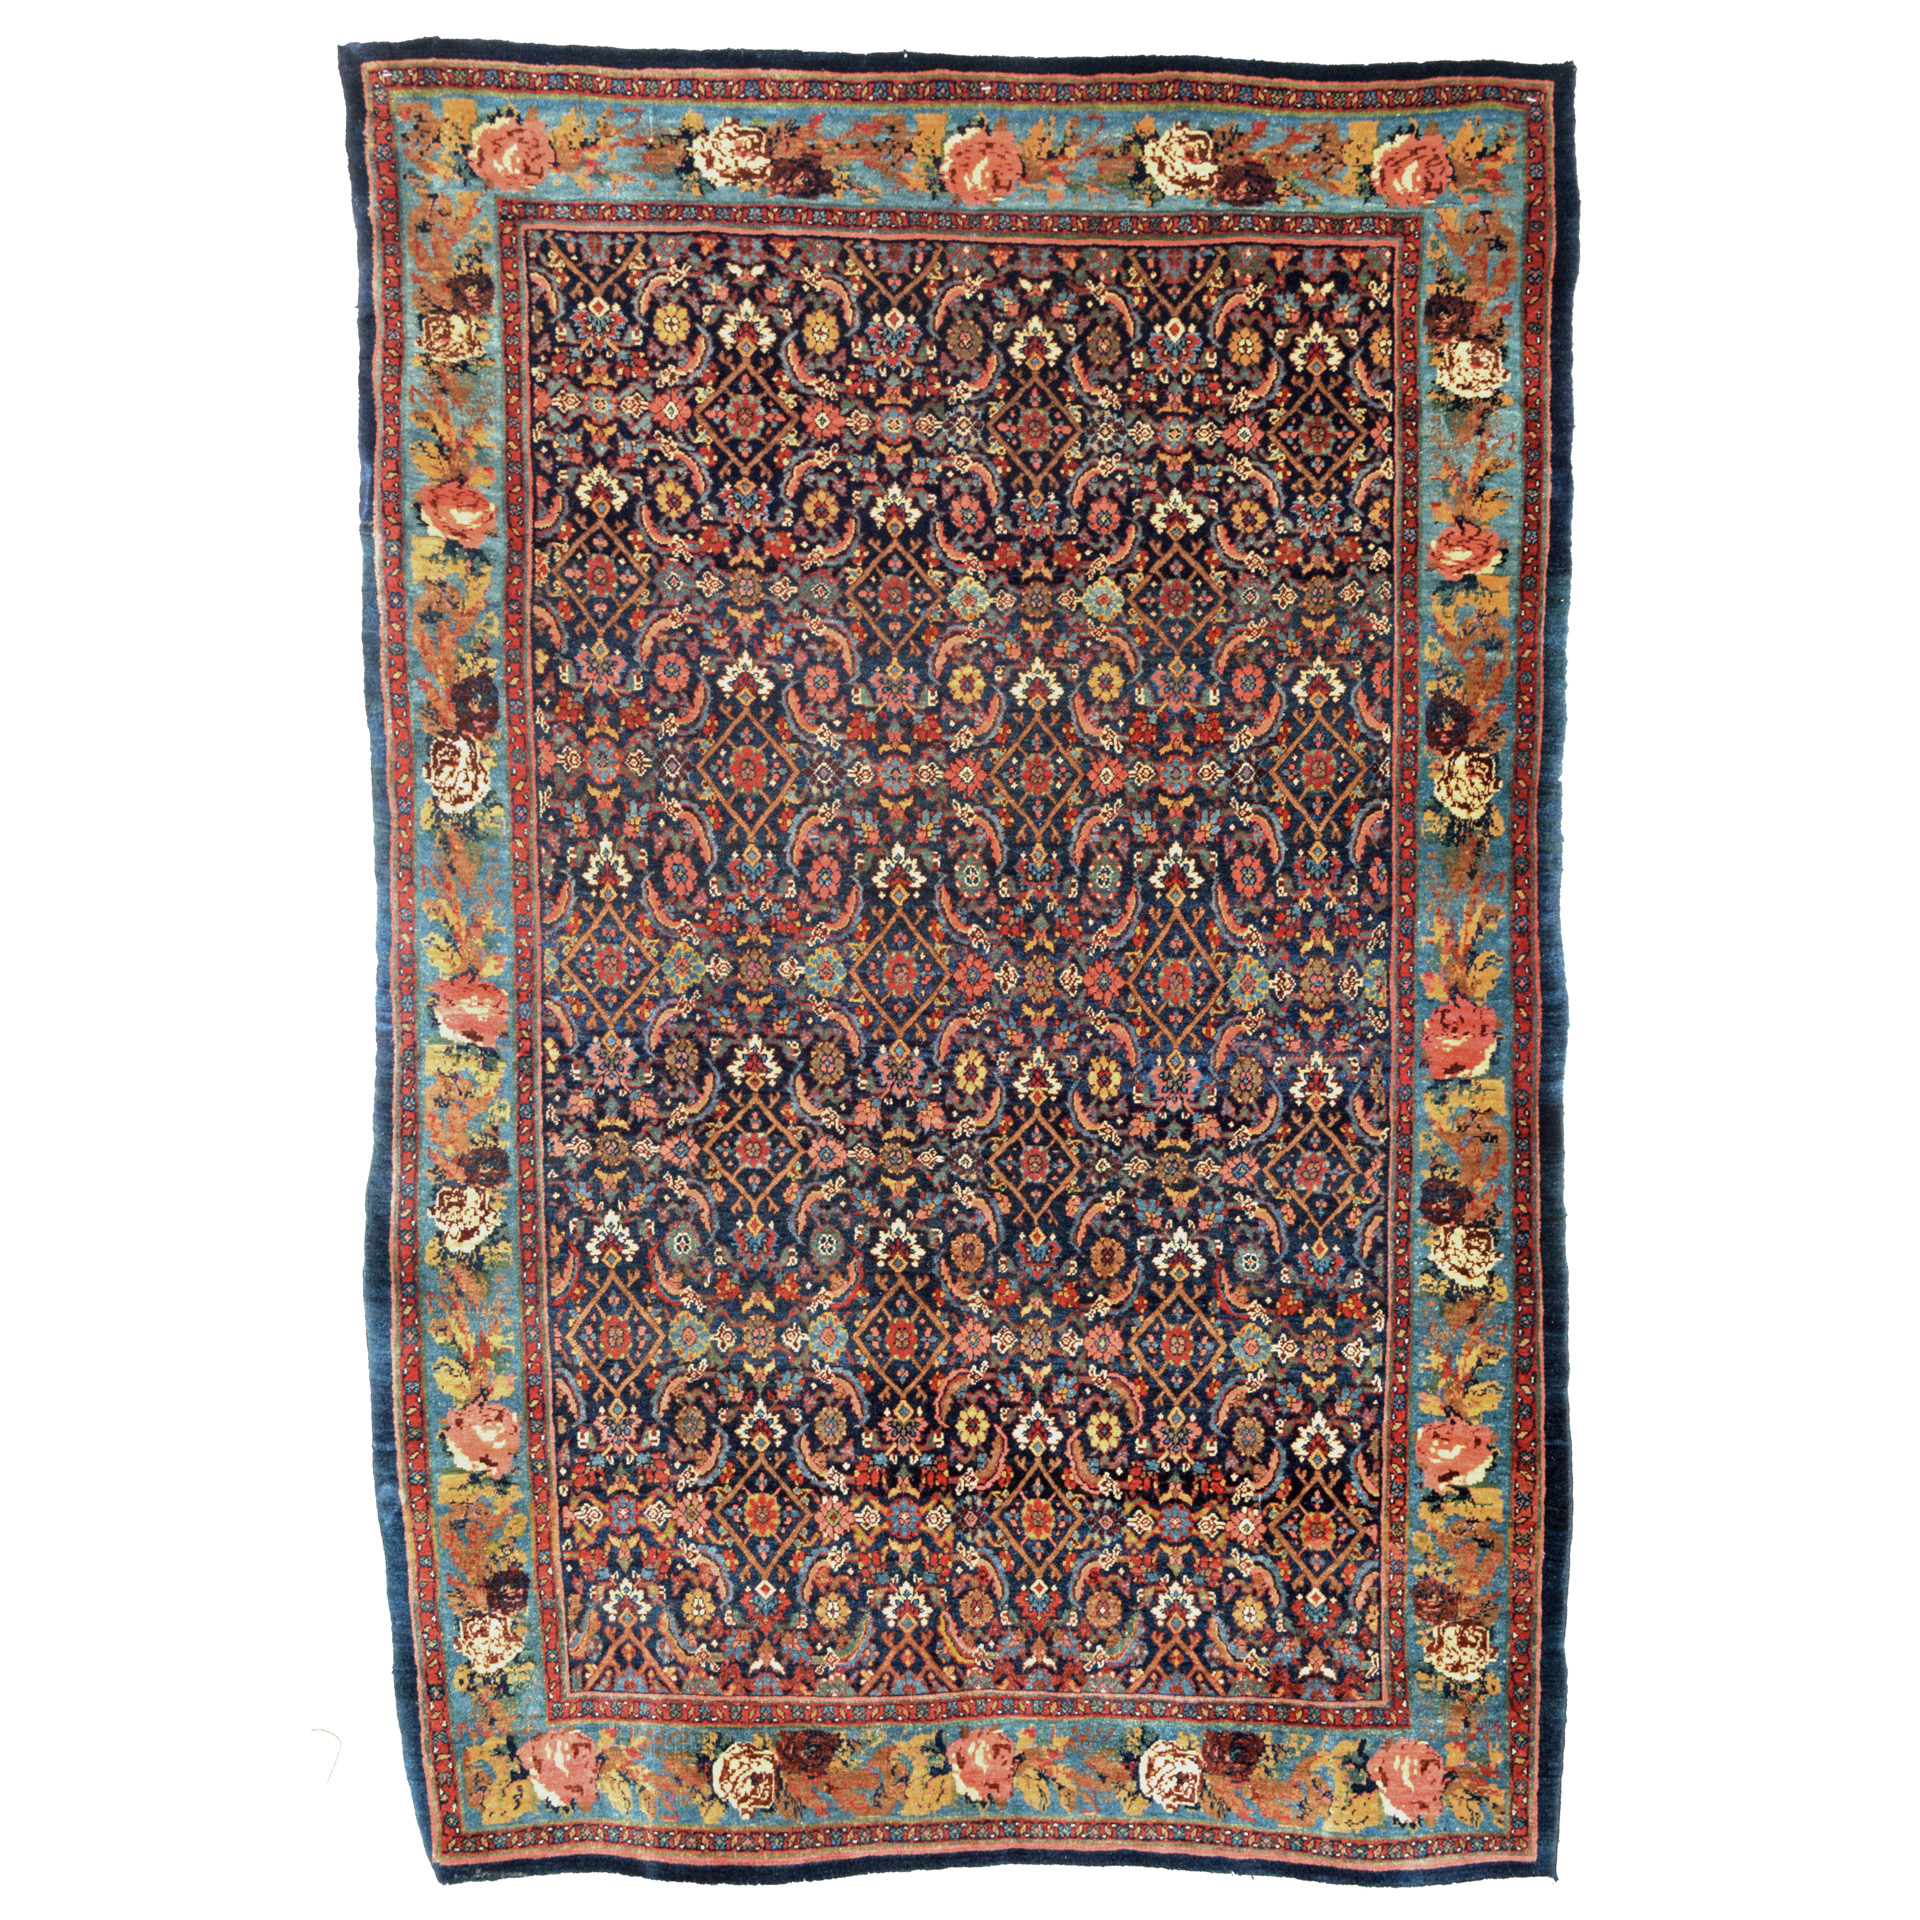 A finely woven antique Persian Bijar rug with the classical Herati design on a navy blue field. A deep sky blue Gul Farang (Foreign Flower) design border frames the field, circa 1900. Douglas Stock Gallery specializes in antique Bidjar rugs and other Kurdish weavings, antique Bidjar rugs Boston,MA area, antique Bidjar rugs Brookline, antique Bidjar rugs Newton, antique Bidjar rugs Wellesley, antique Bidjar rugs Weston, antique Bidjar Rugs Natick,MA area